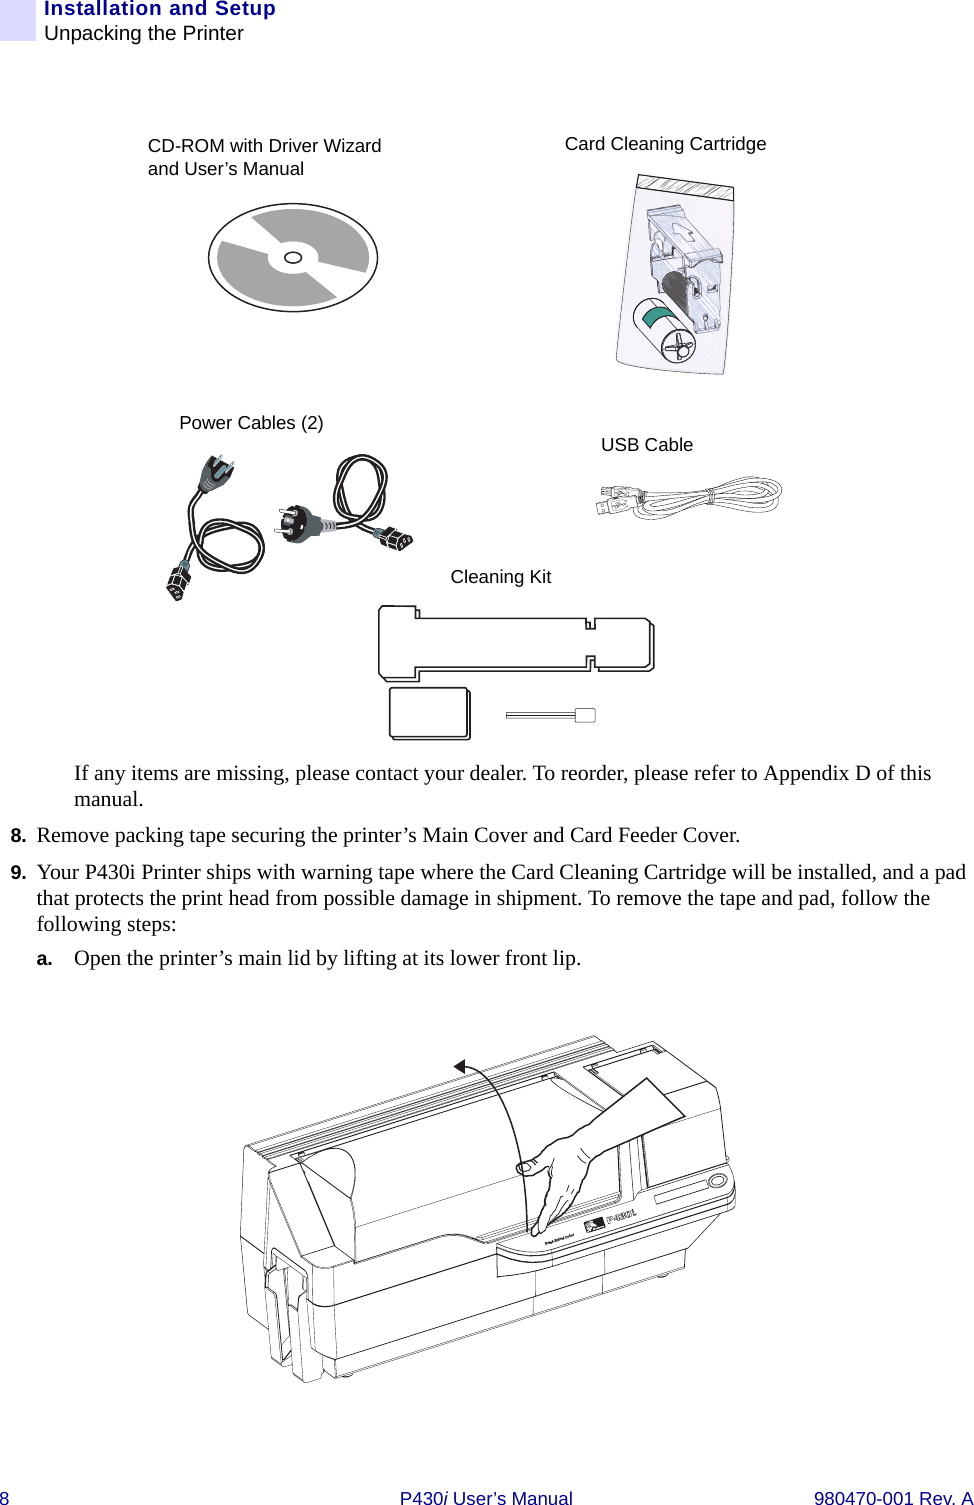 8 P430i User’s Manual 980470-001 Rev. AInstallation and SetupUnpacking the PrinterIf any items are missing, please contact your dealer. To reorder, please refer to Appendix D of this manual.8. Remove packing tape securing the printer’s Main Cover and Card Feeder Cover.9. Your P430i Printer ships with warning tape where the Card Cleaning Cartridge will be installed, and a pad that protects the print head from possible damage in shipment. To remove the tape and pad, follow the following steps:a. Open the printer’s main lid by lifting at its lower front lip.Power Cables (2)Cleaning KitCD-ROM with Driver Wizard and User’s ManualCard Cleaning CartridgeUSB CableDual-Sided Color